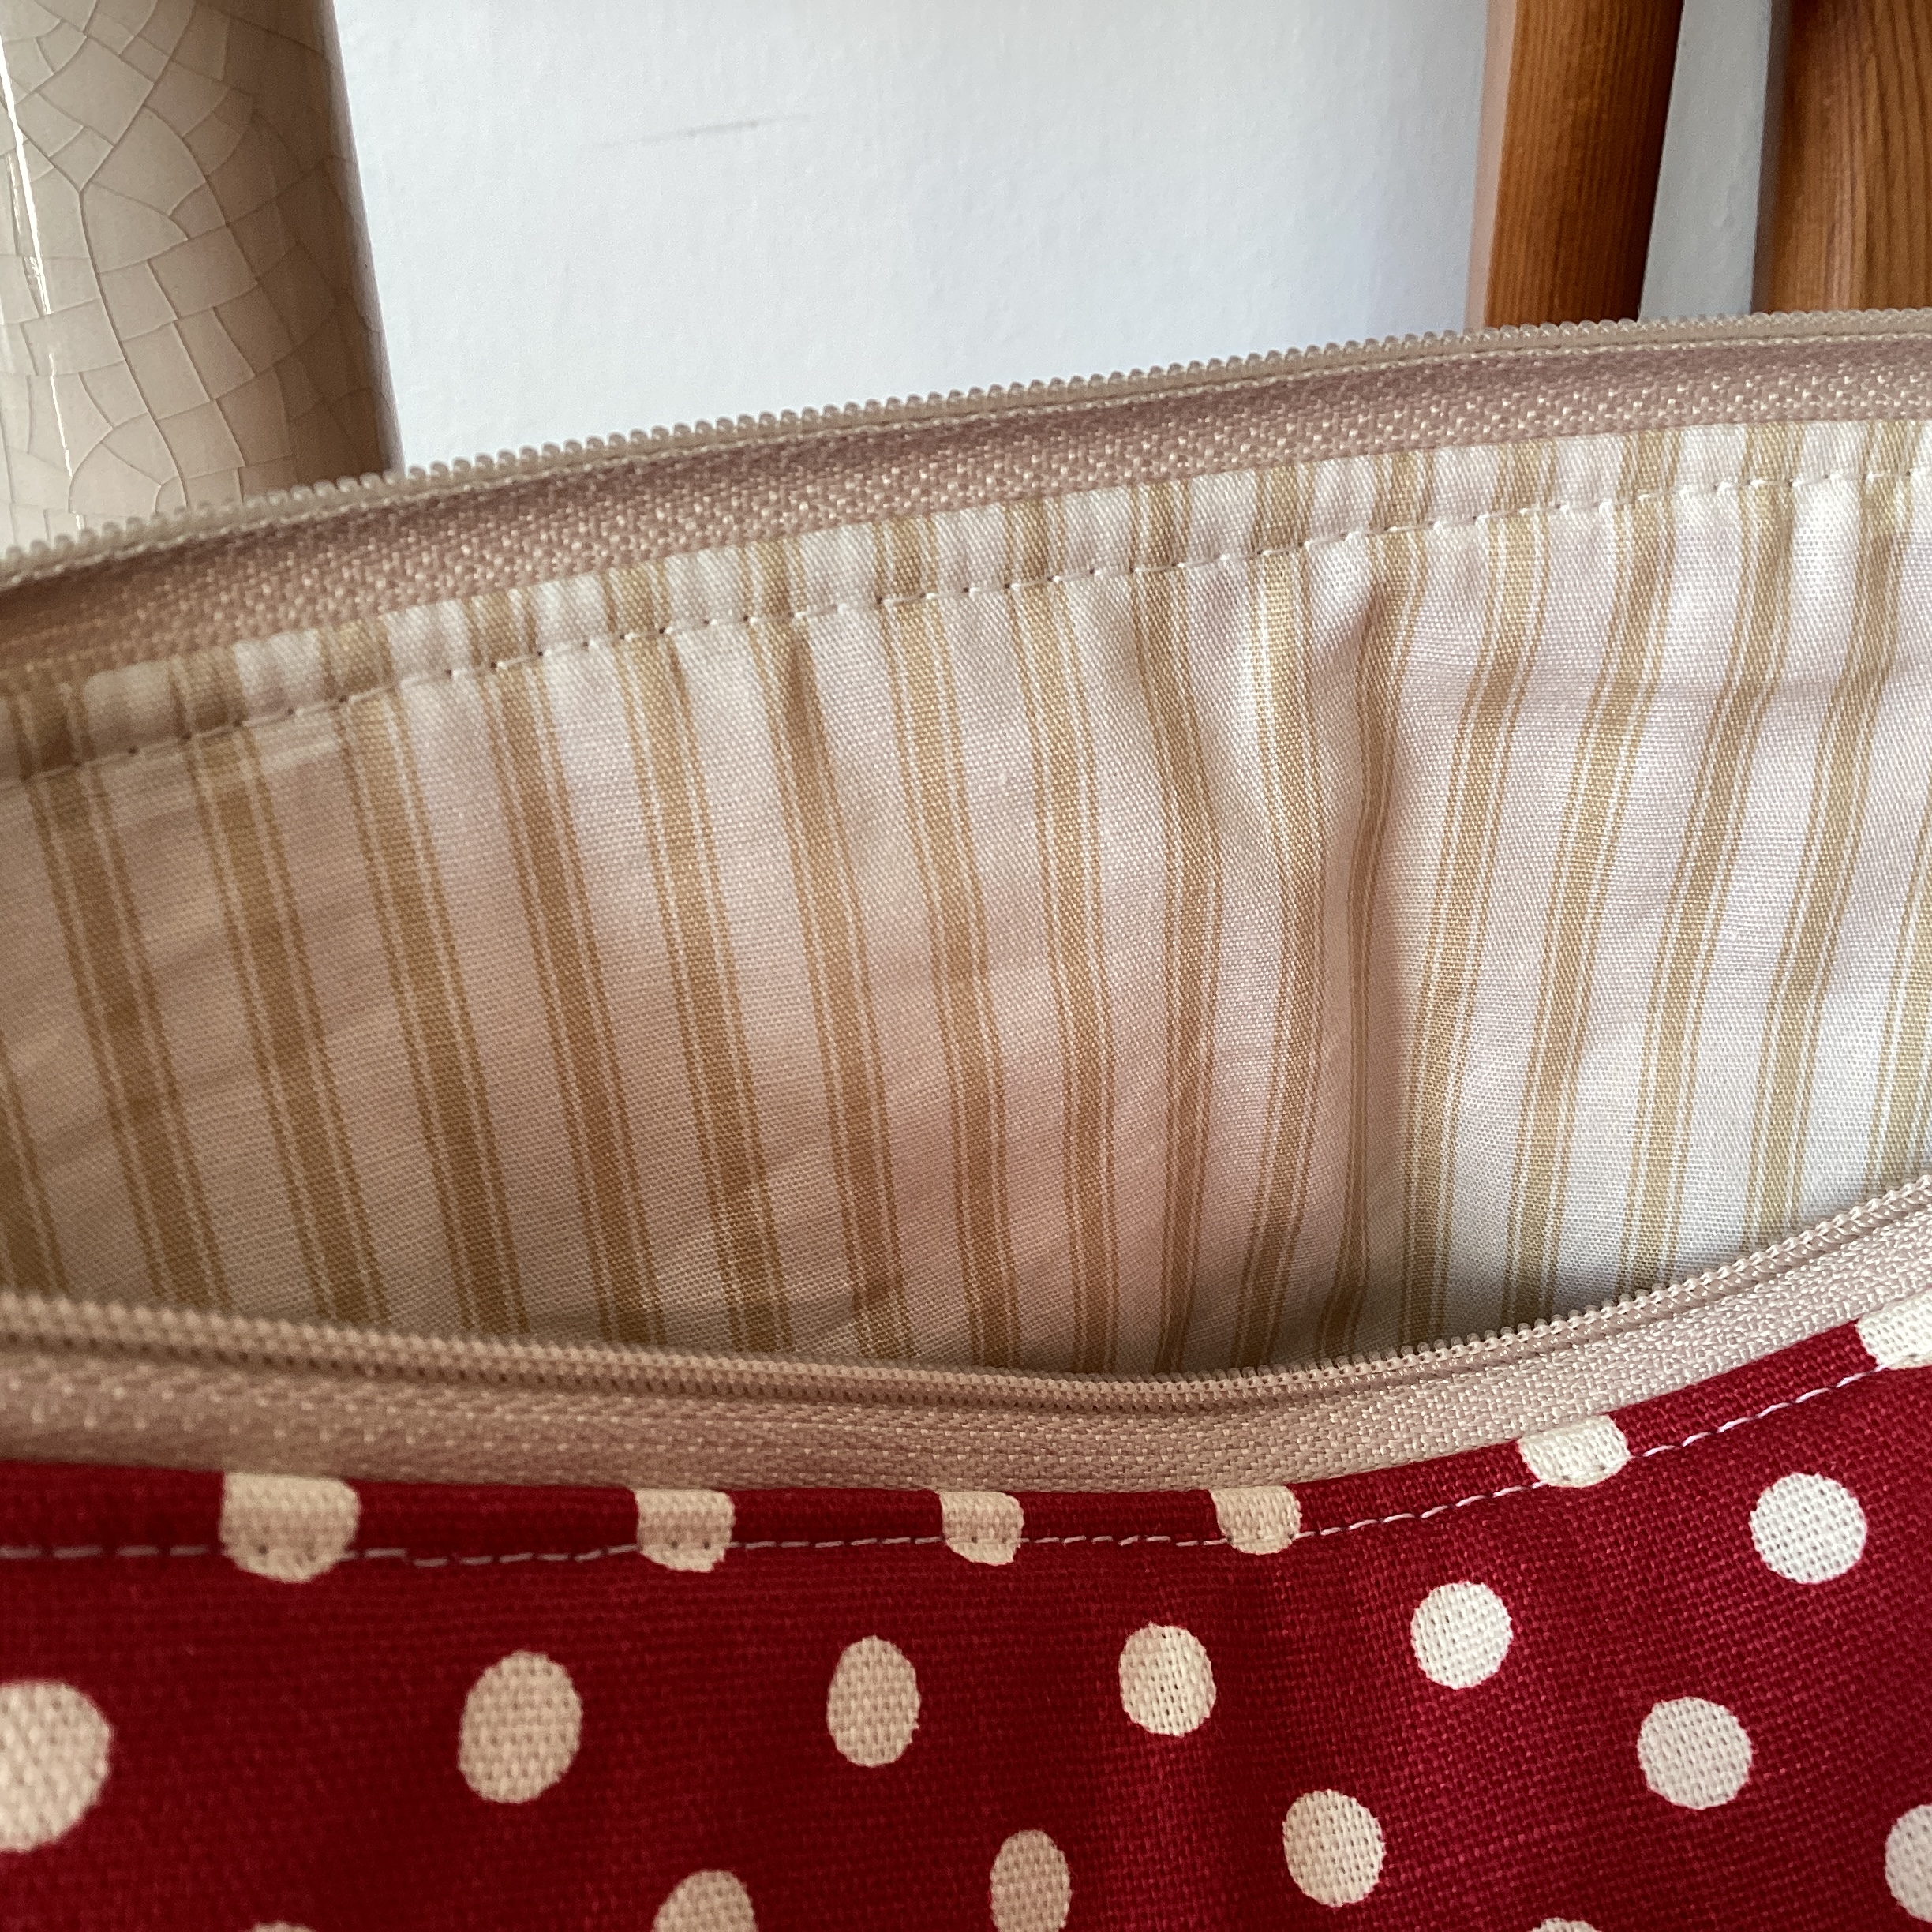 Zipped Pouch - red and white spot